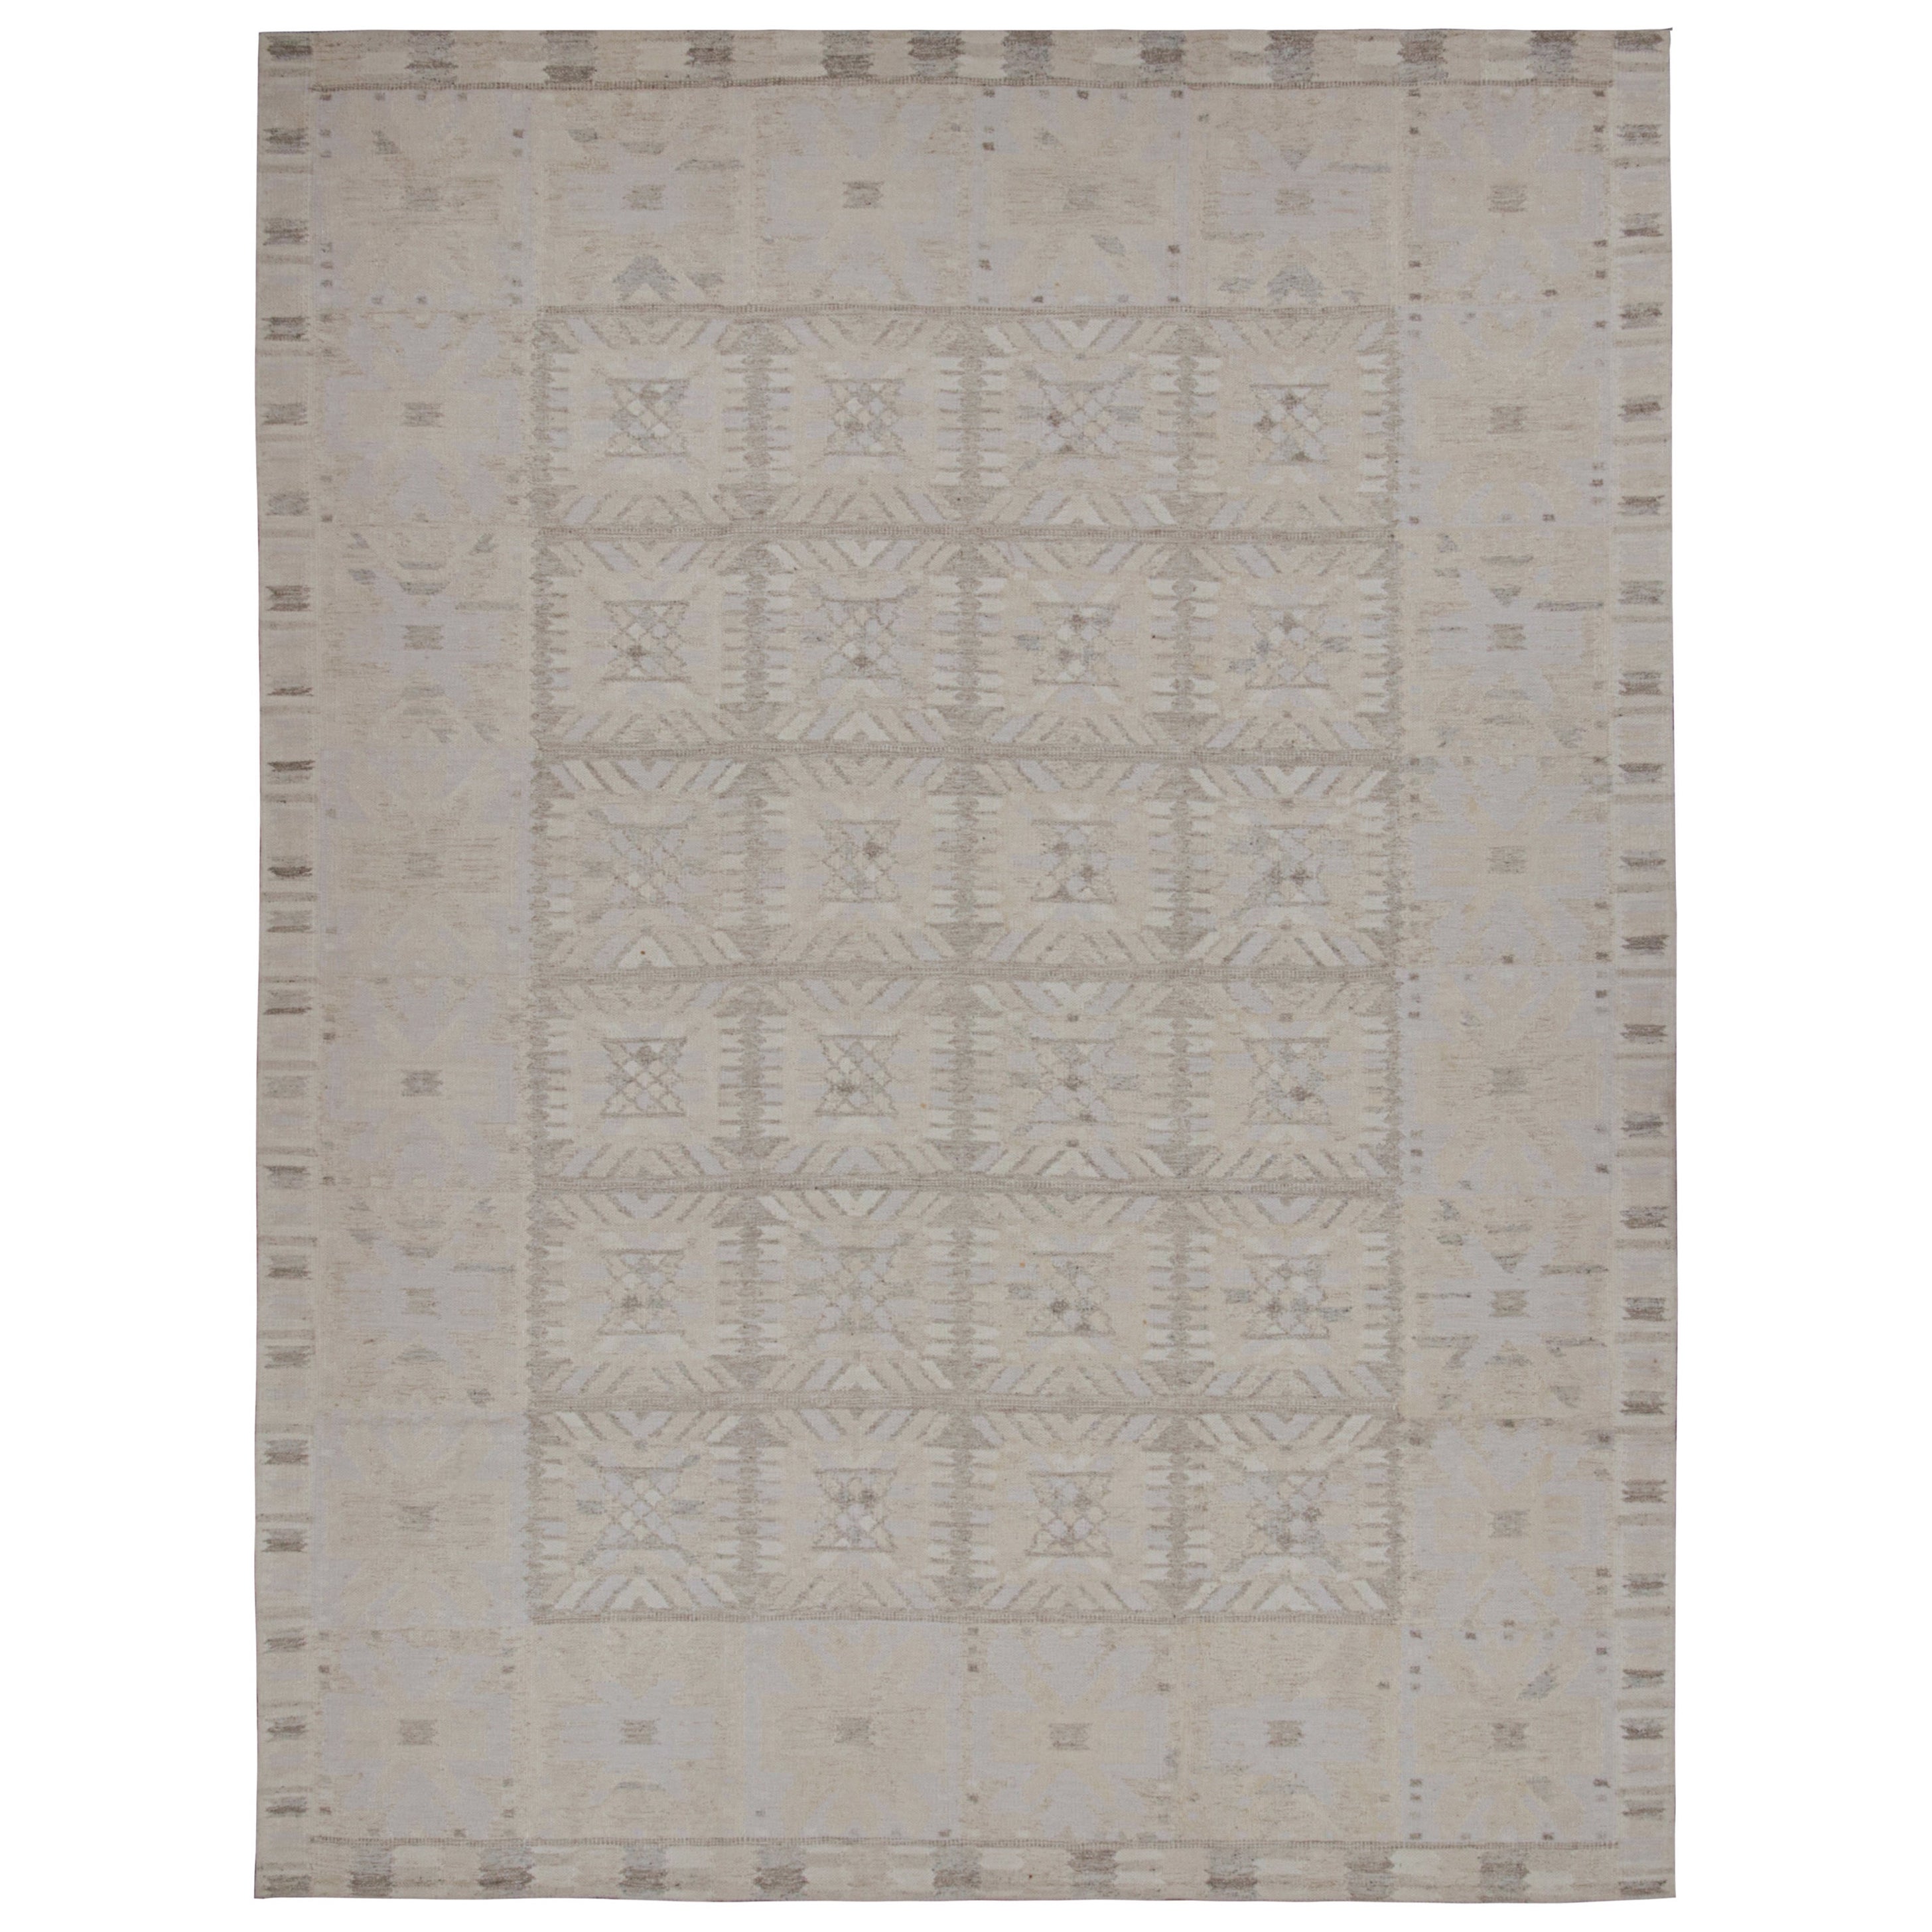 Rug & Kilim’s Scandinavian Style Kilim Rug in Gray and White Geometric Patterns For Sale